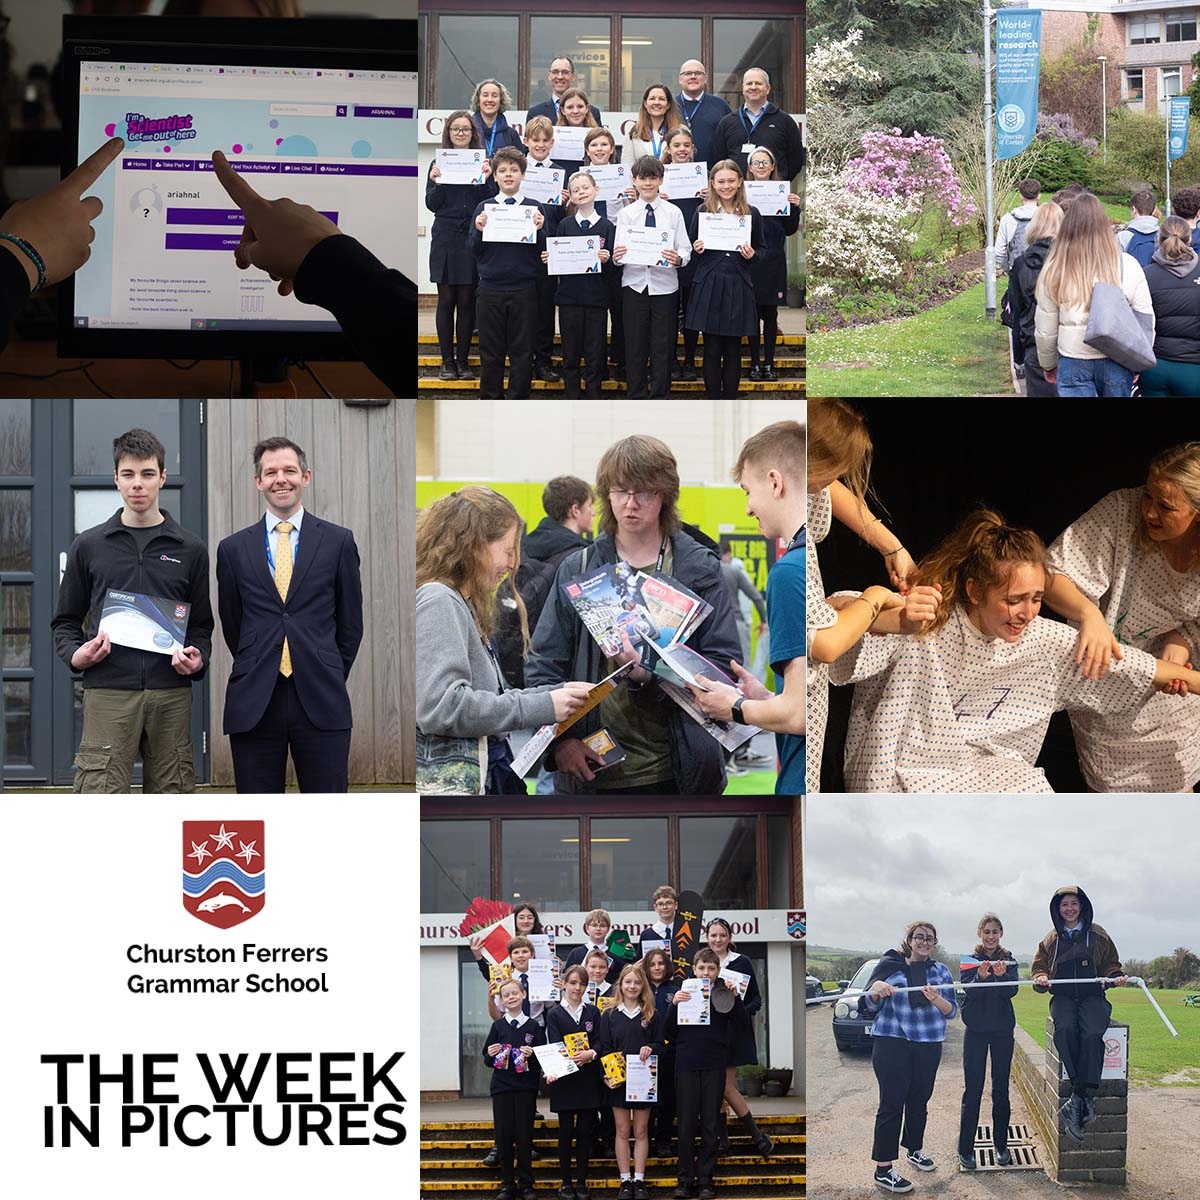 Week in pics: To find out what we've been up to this week, please head to our LinkedIn, Facebook or Instagram feeds. #CFGS #weekinpics